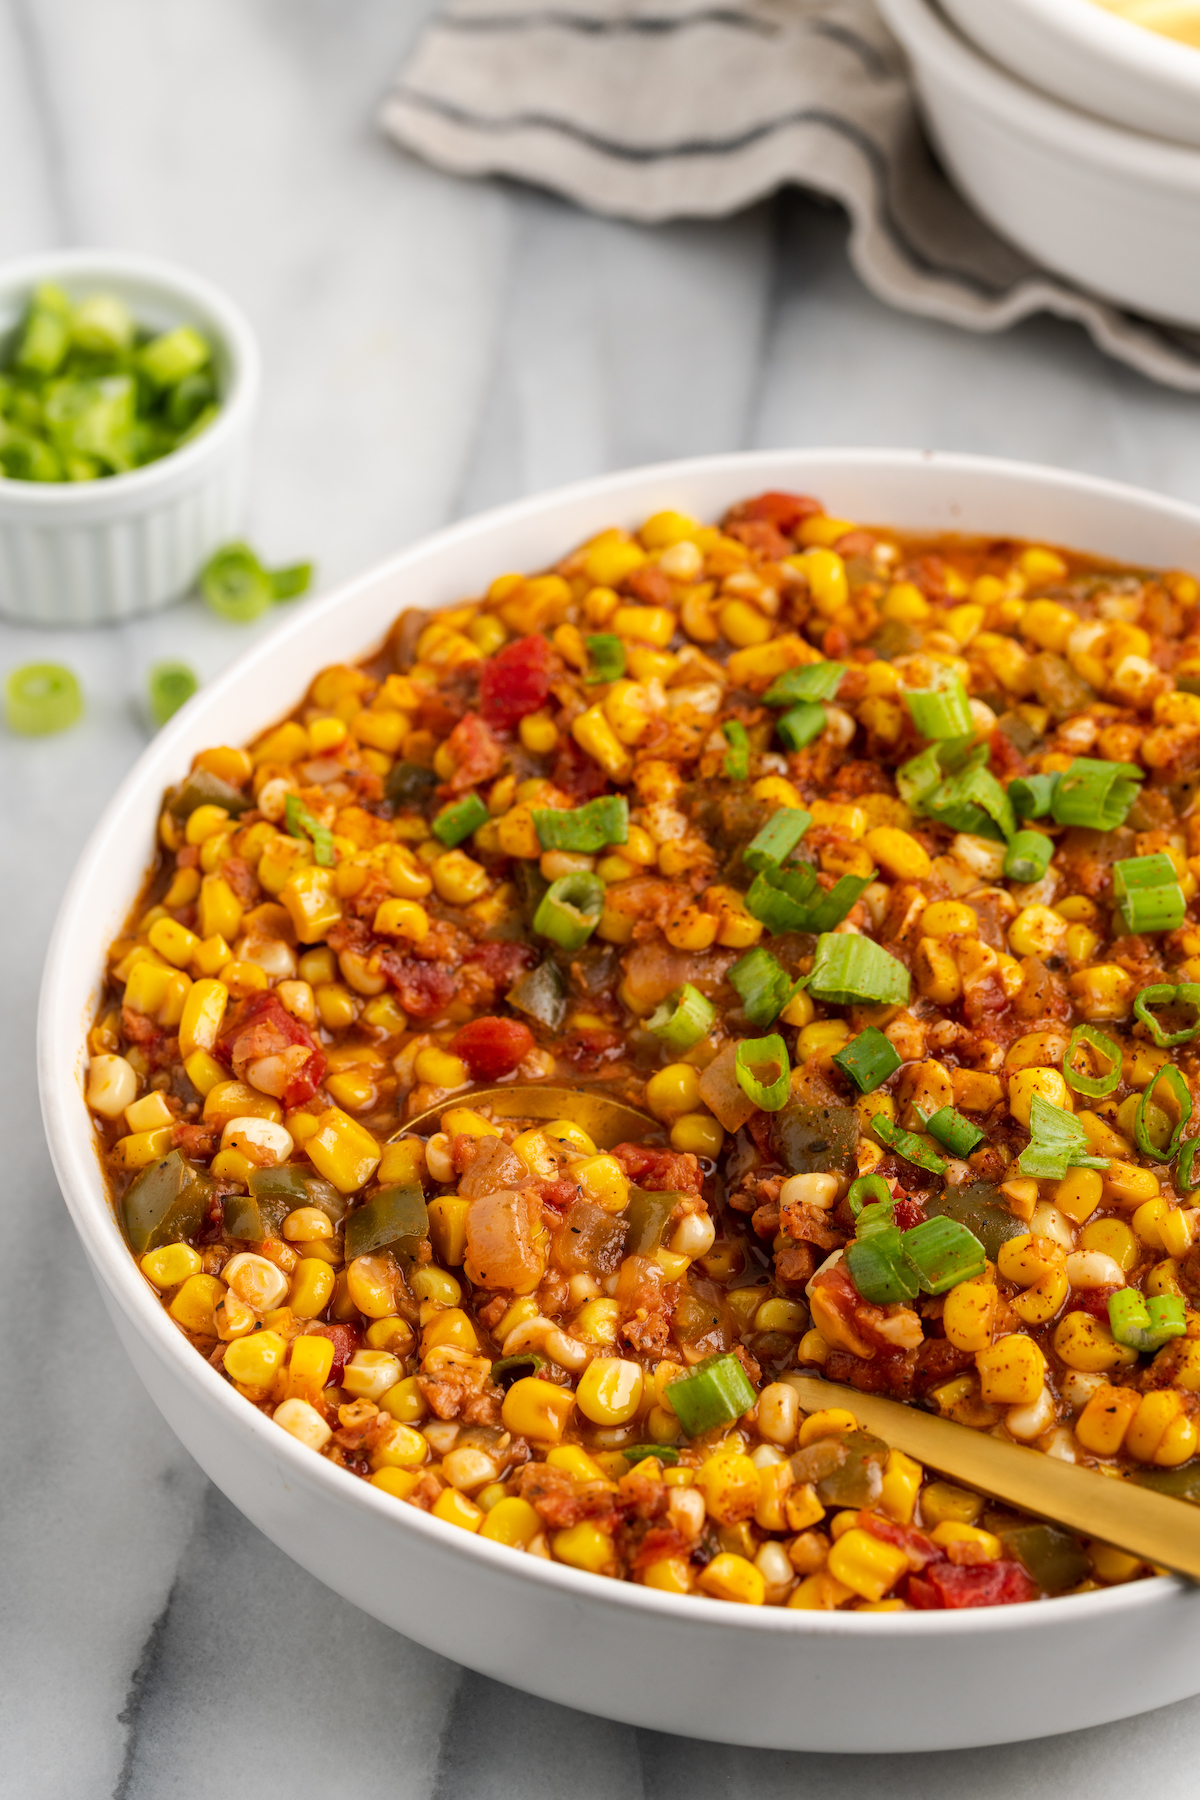 Large bowl of vegan corn maque choux with serving spoon